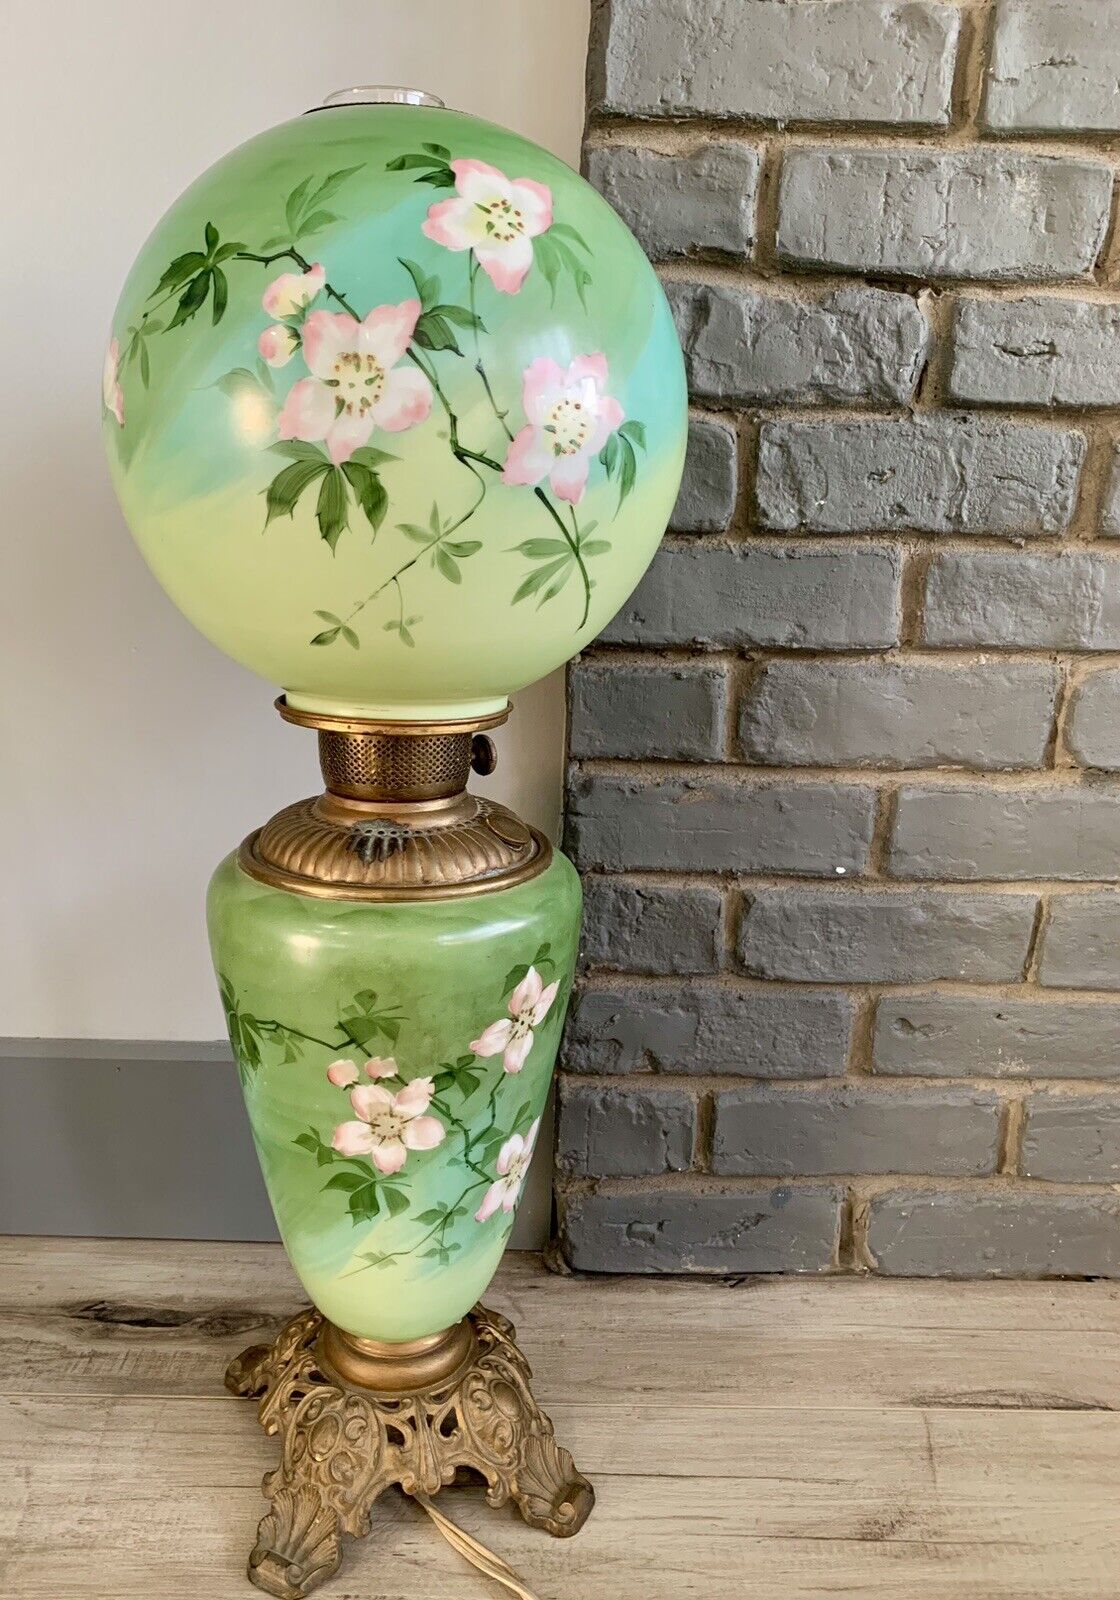 Two Foot Tall Victorian Era Globe Hand Painted, Electric, Gone With The Wind